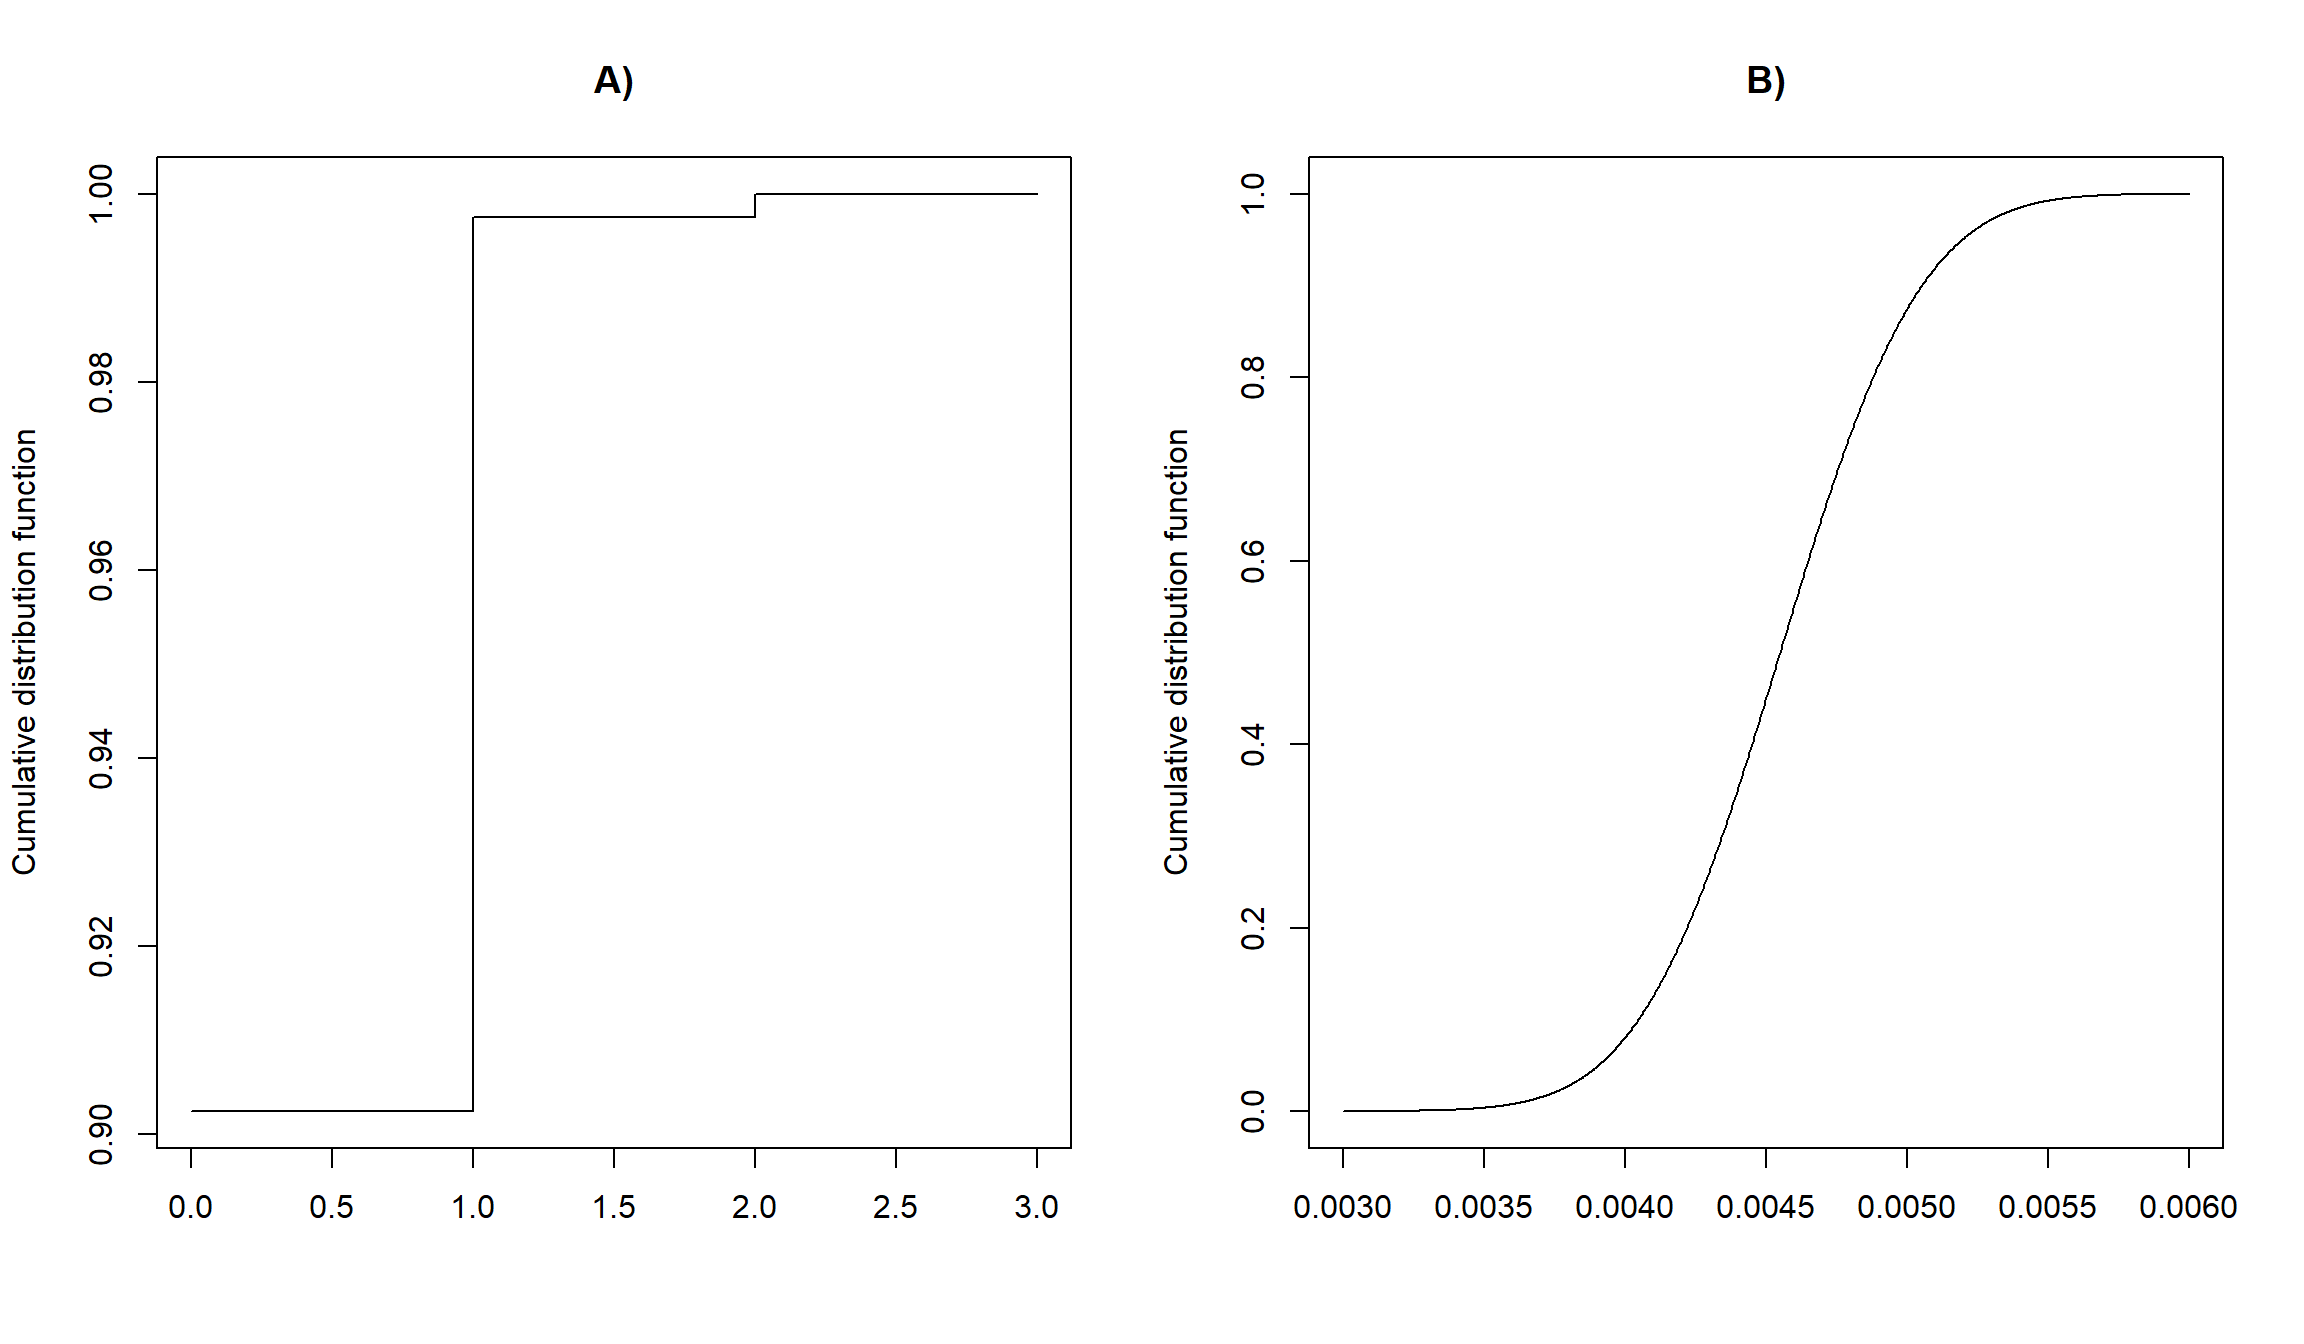 Cumulative distribution functions for the chronic wasting disease example (binomial distribution)  and the housefly example (Normal distribution).